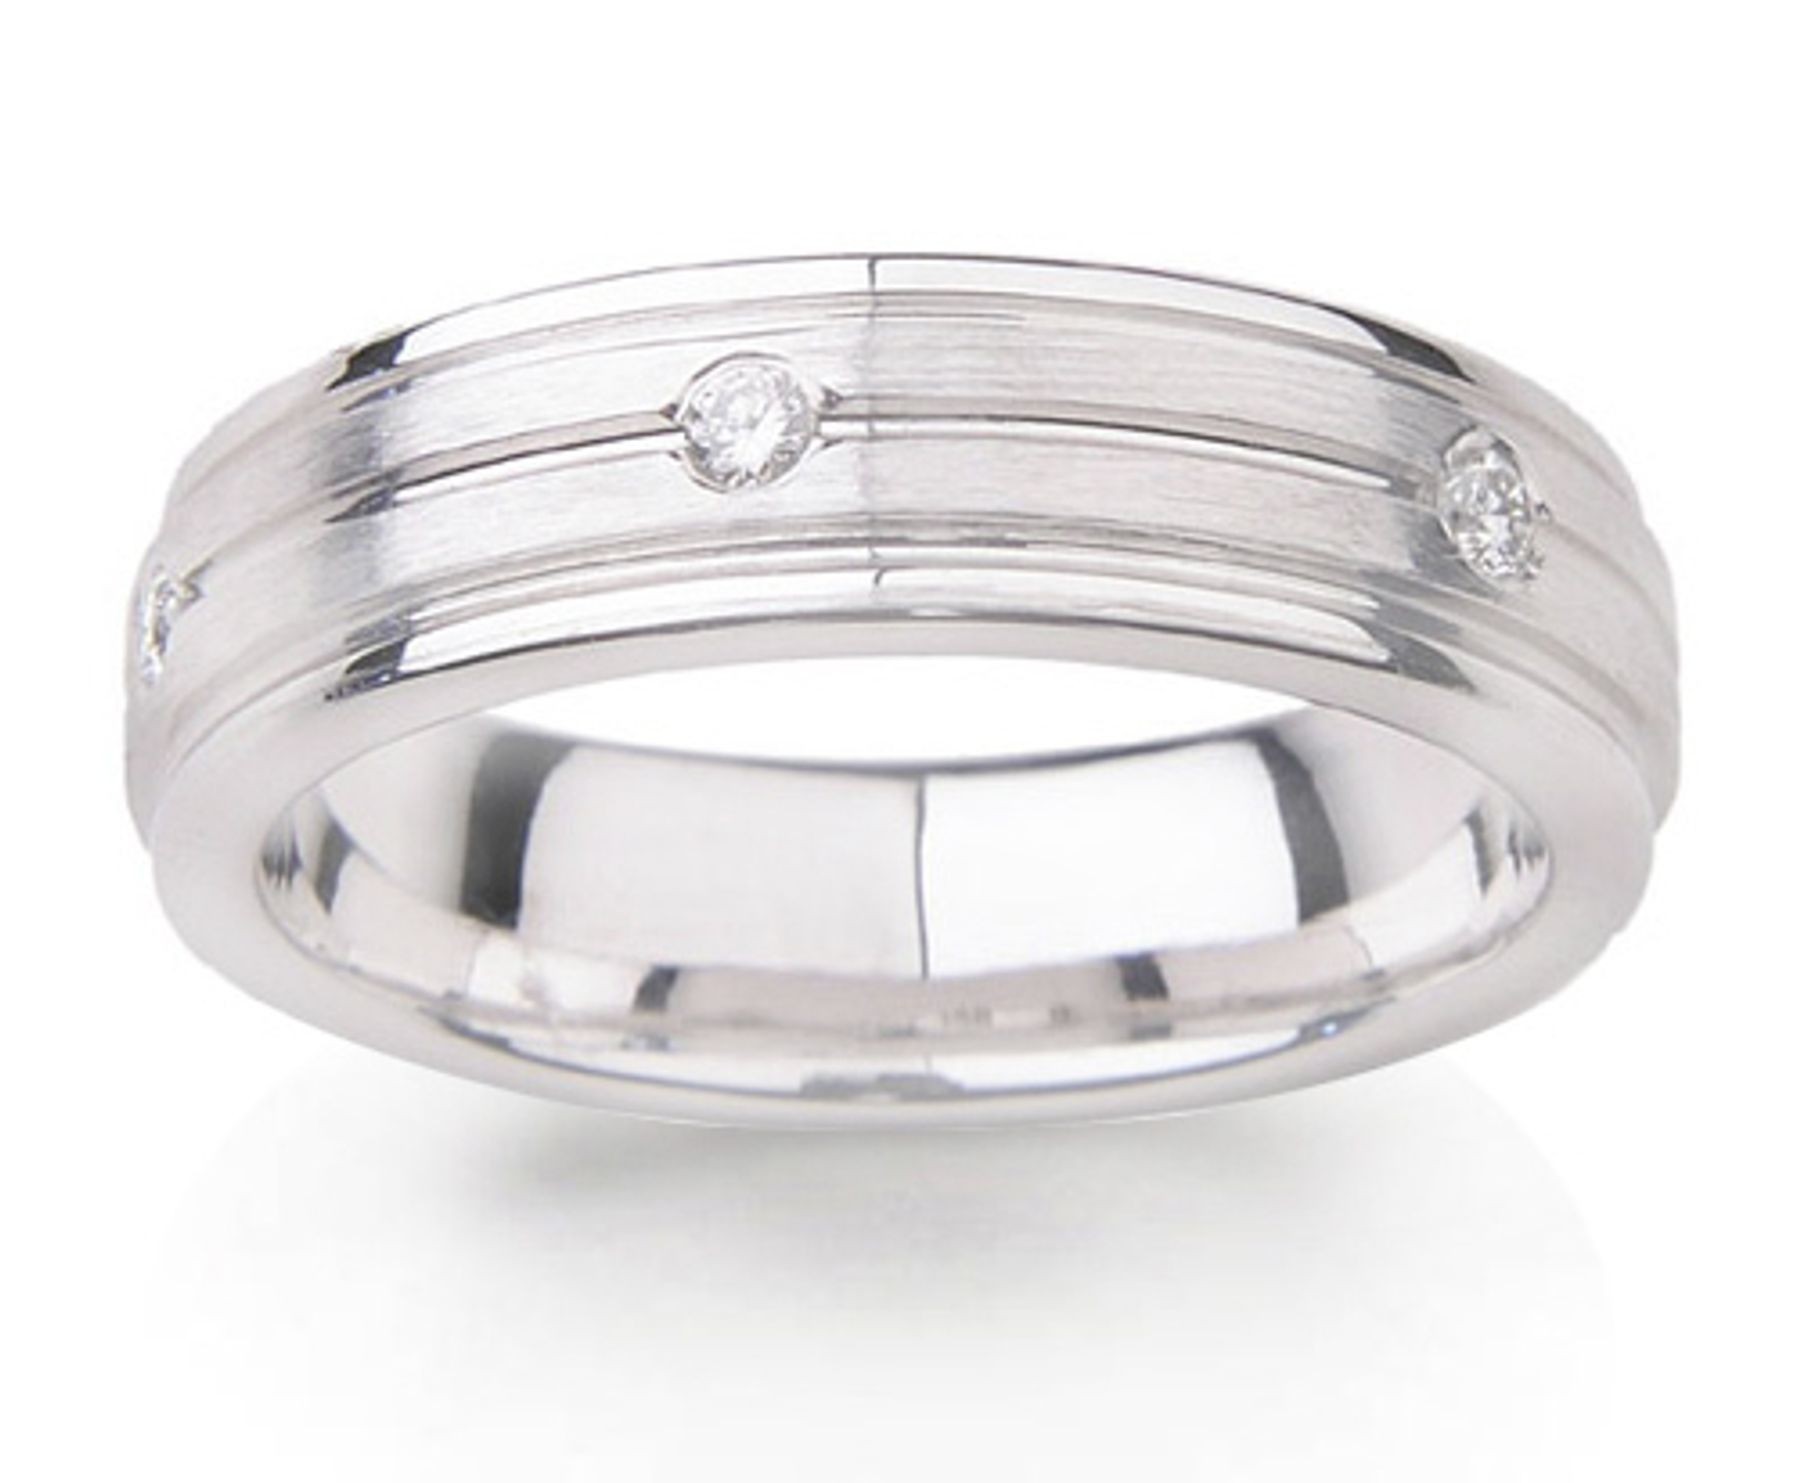 Glittering Mens Diamond Wedding Band in Platinum Ring Size 9 to 12